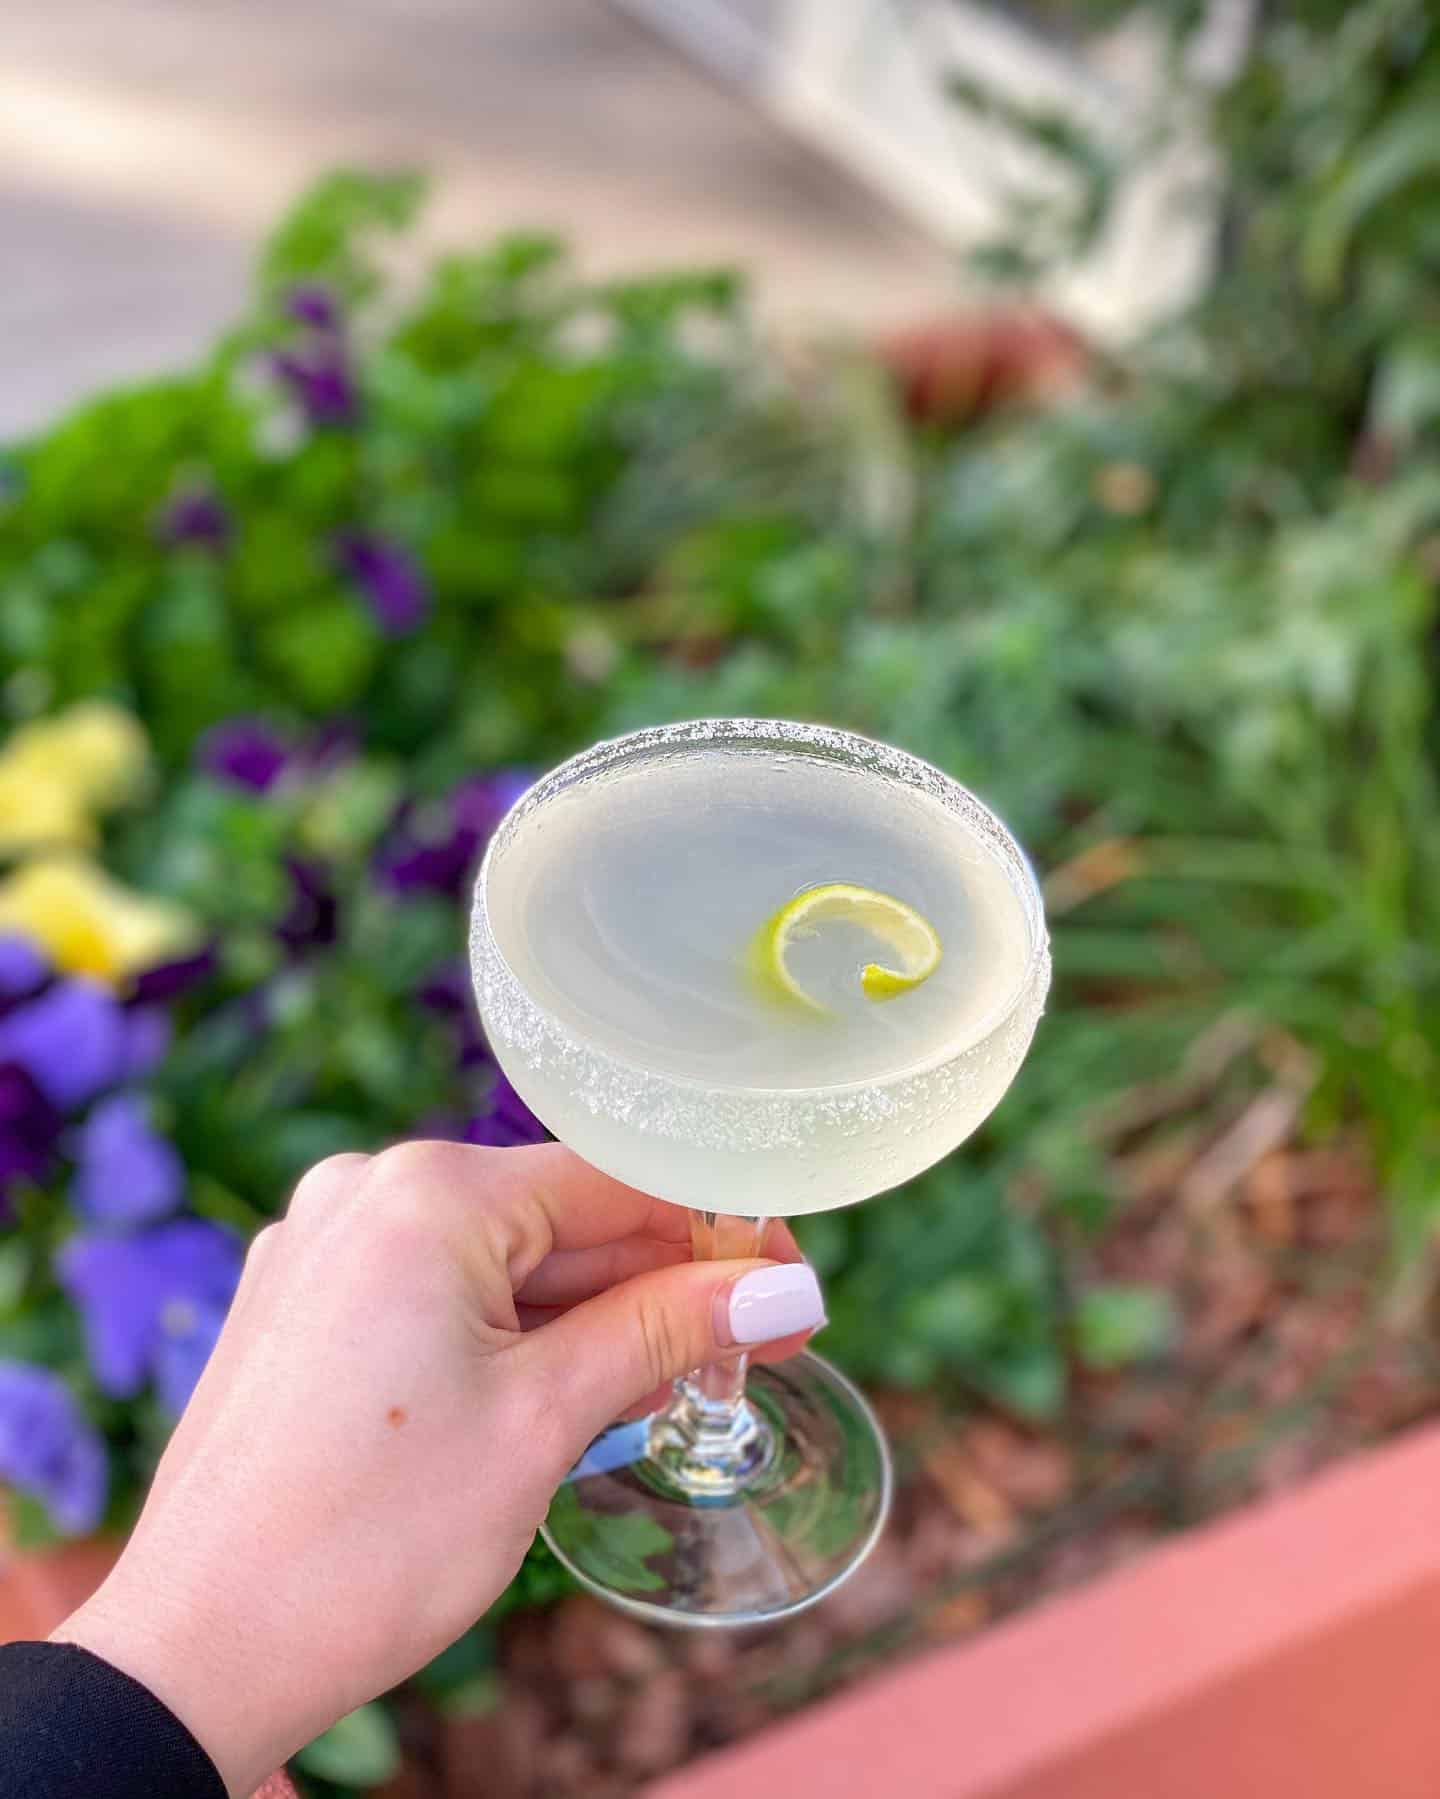 Friday night calls for cocktails and sushi at @piscessushiclt! Get your fill of delicious drinks and food at one of our favorite spots